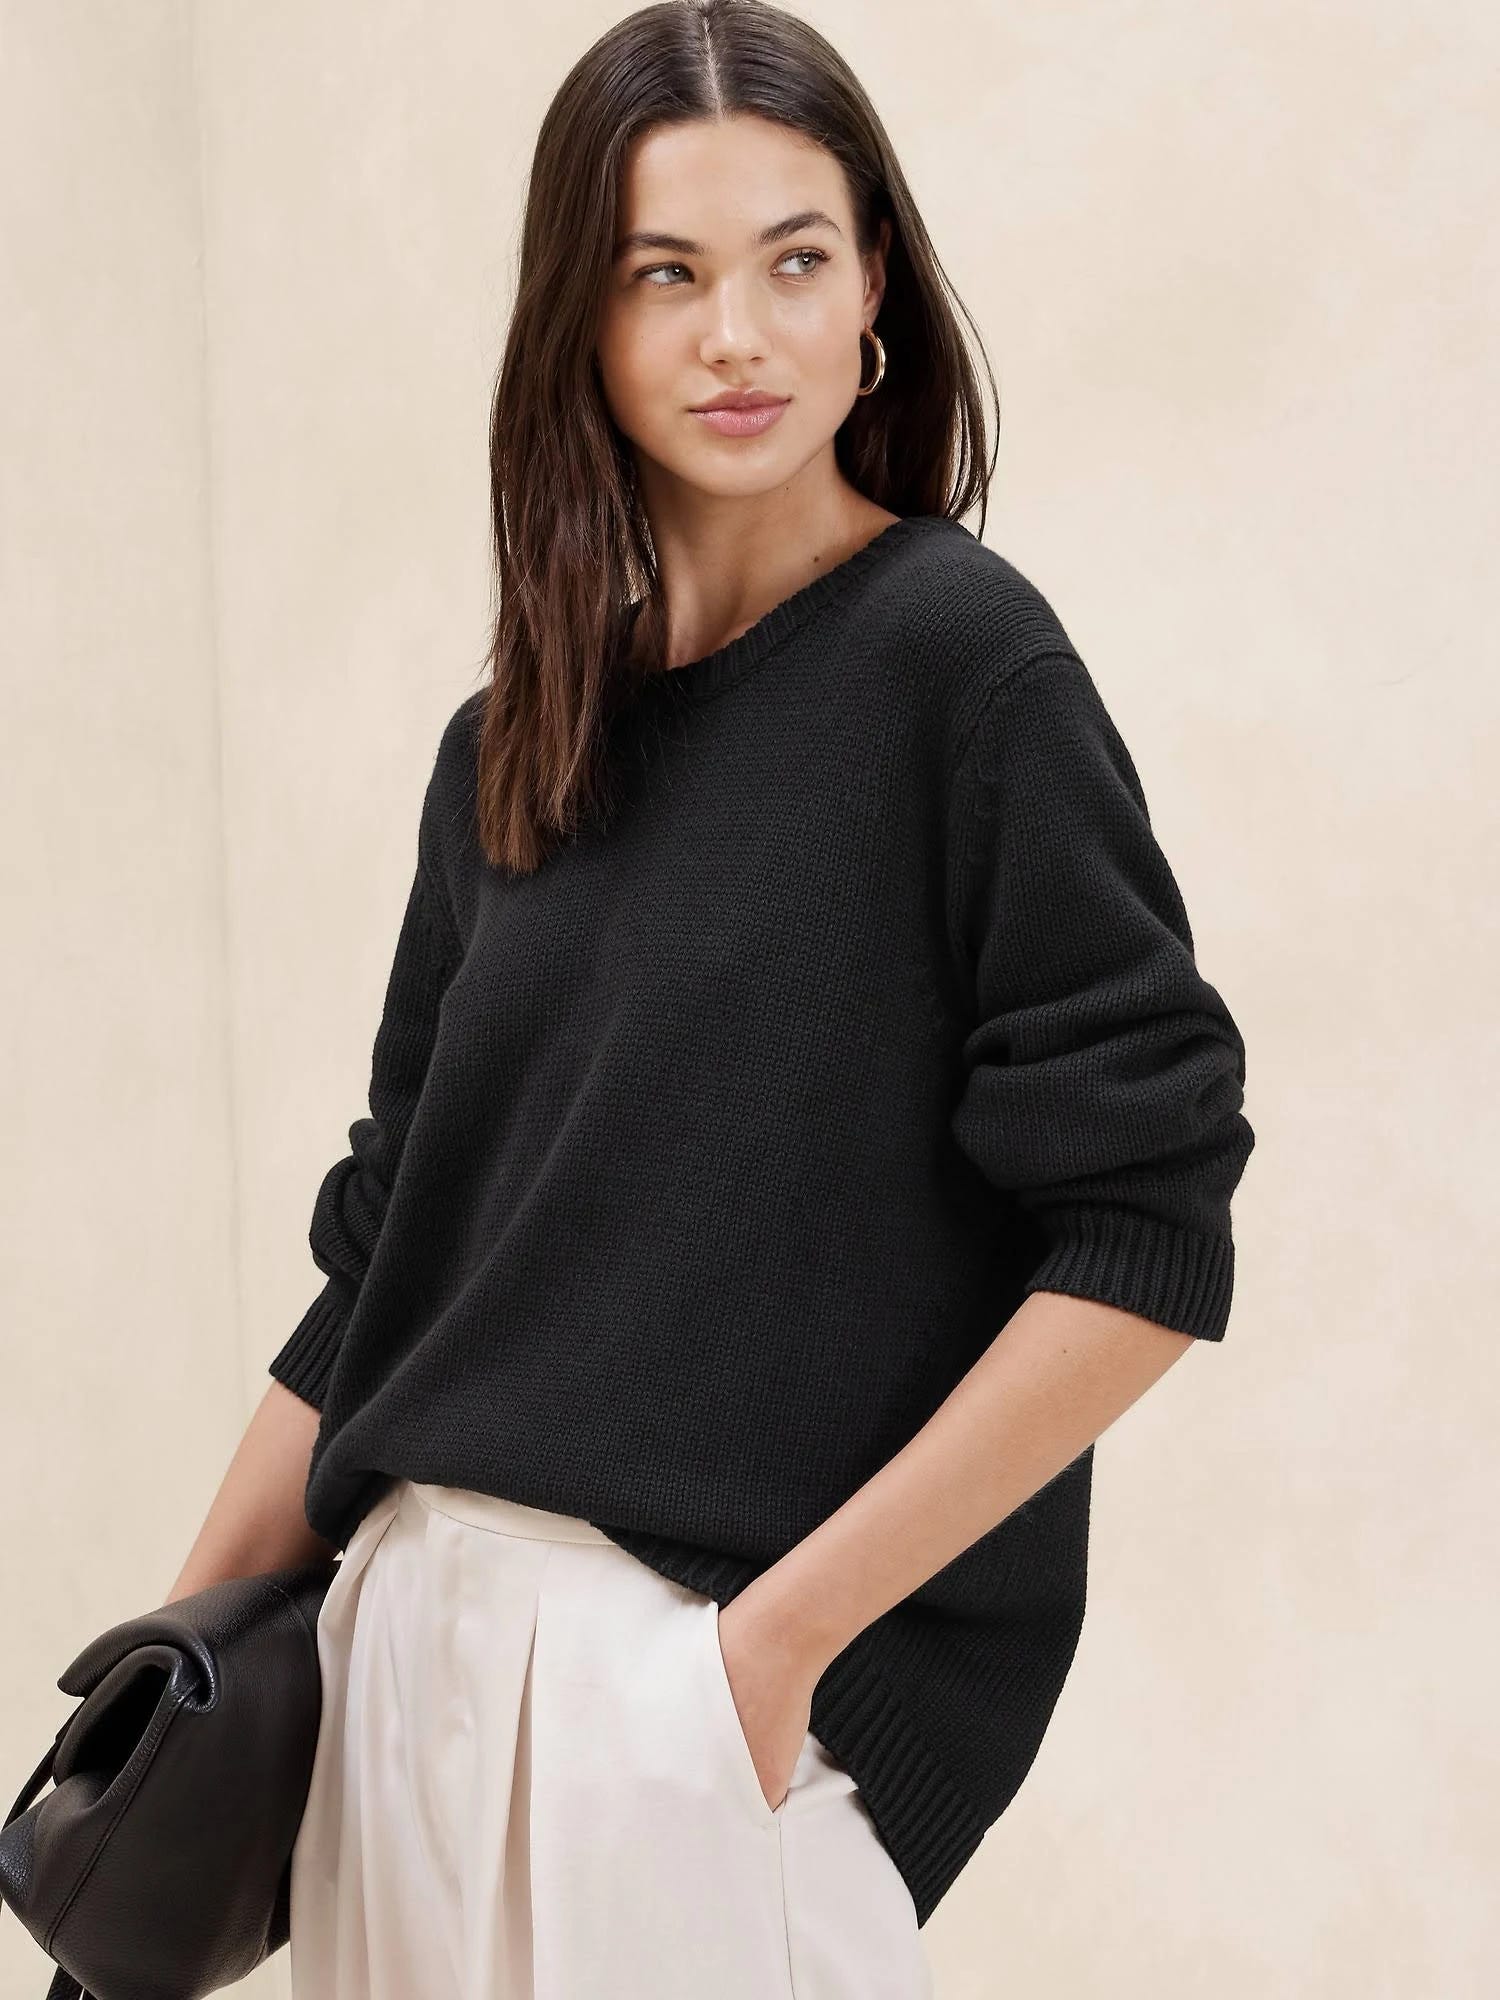 Attractive and Comfortable Women's Oversized Sweater in Black | Image